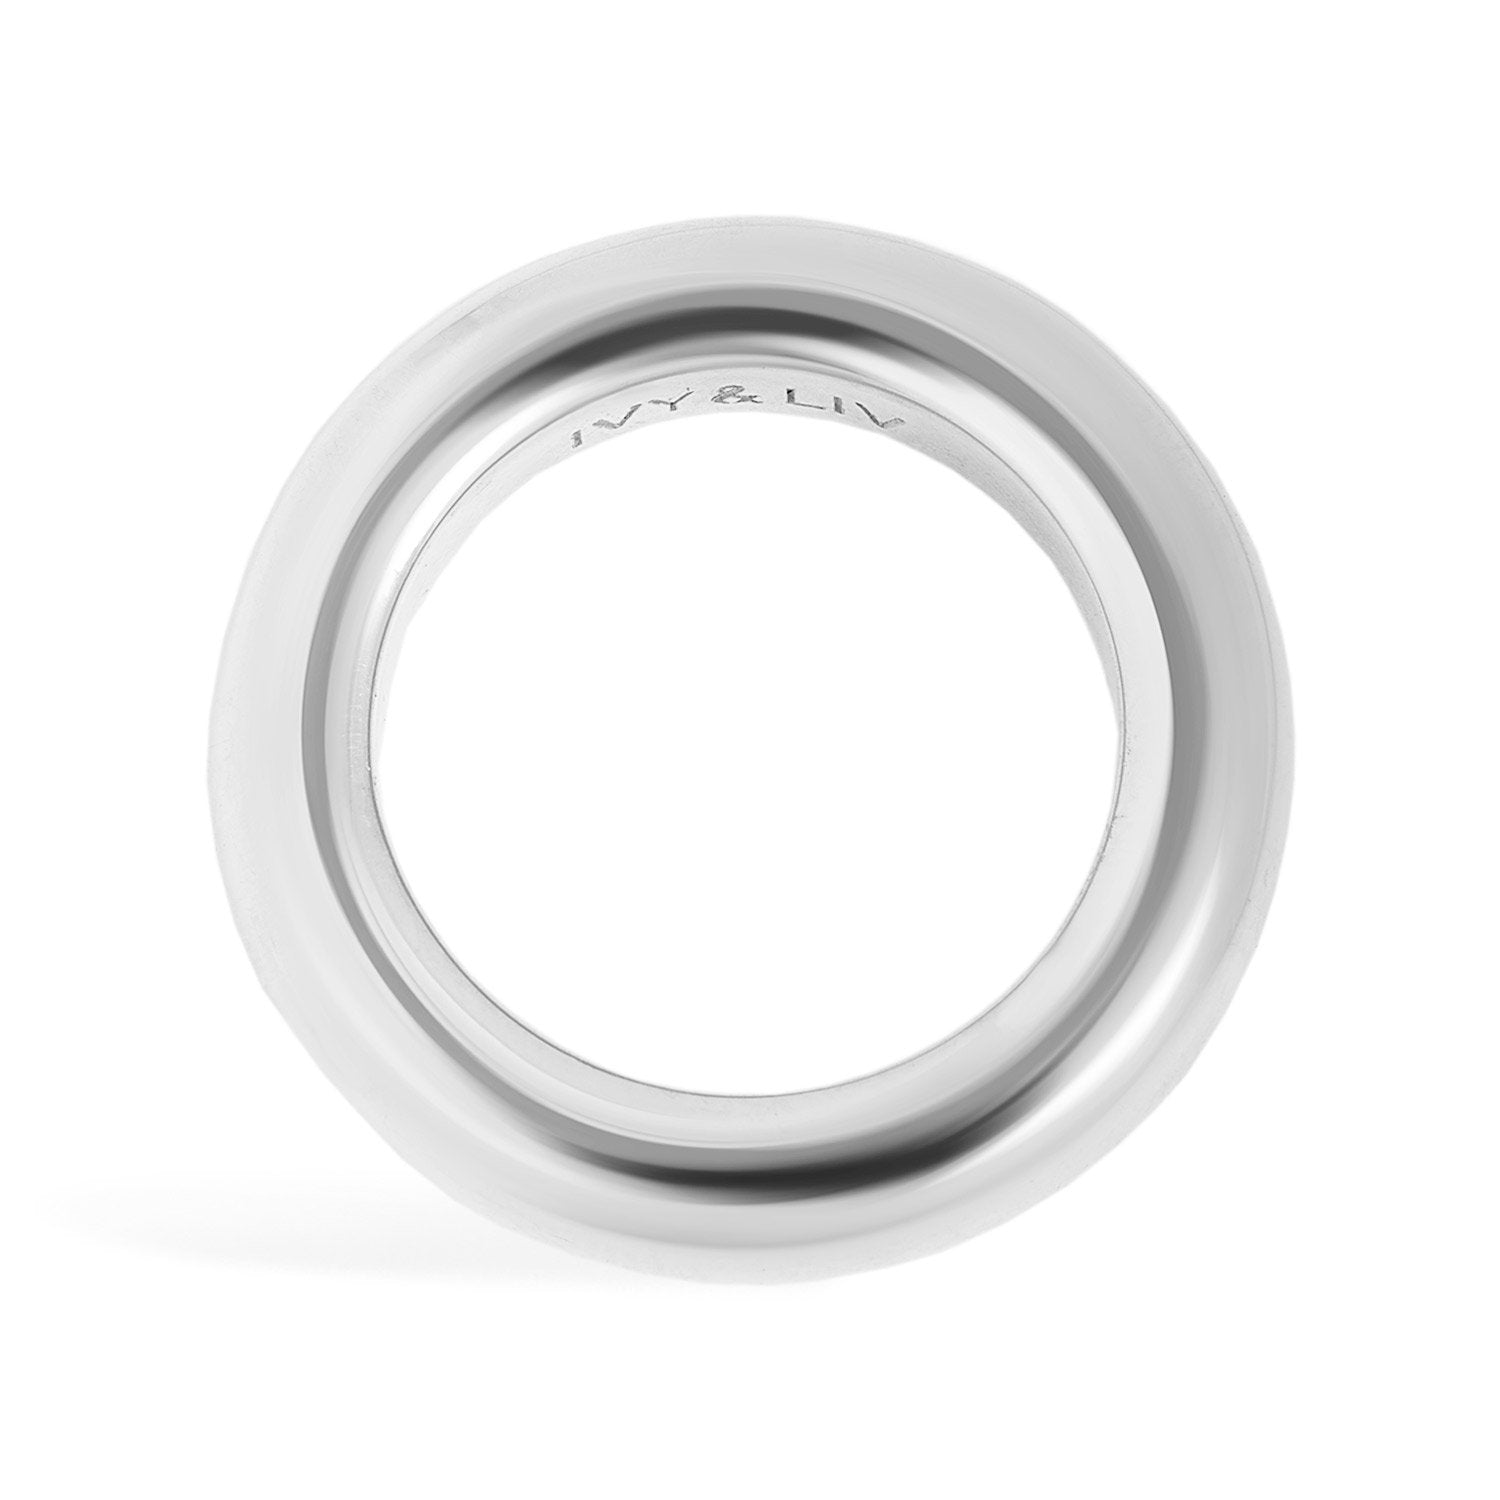 Elementary Ring 5.0 silver